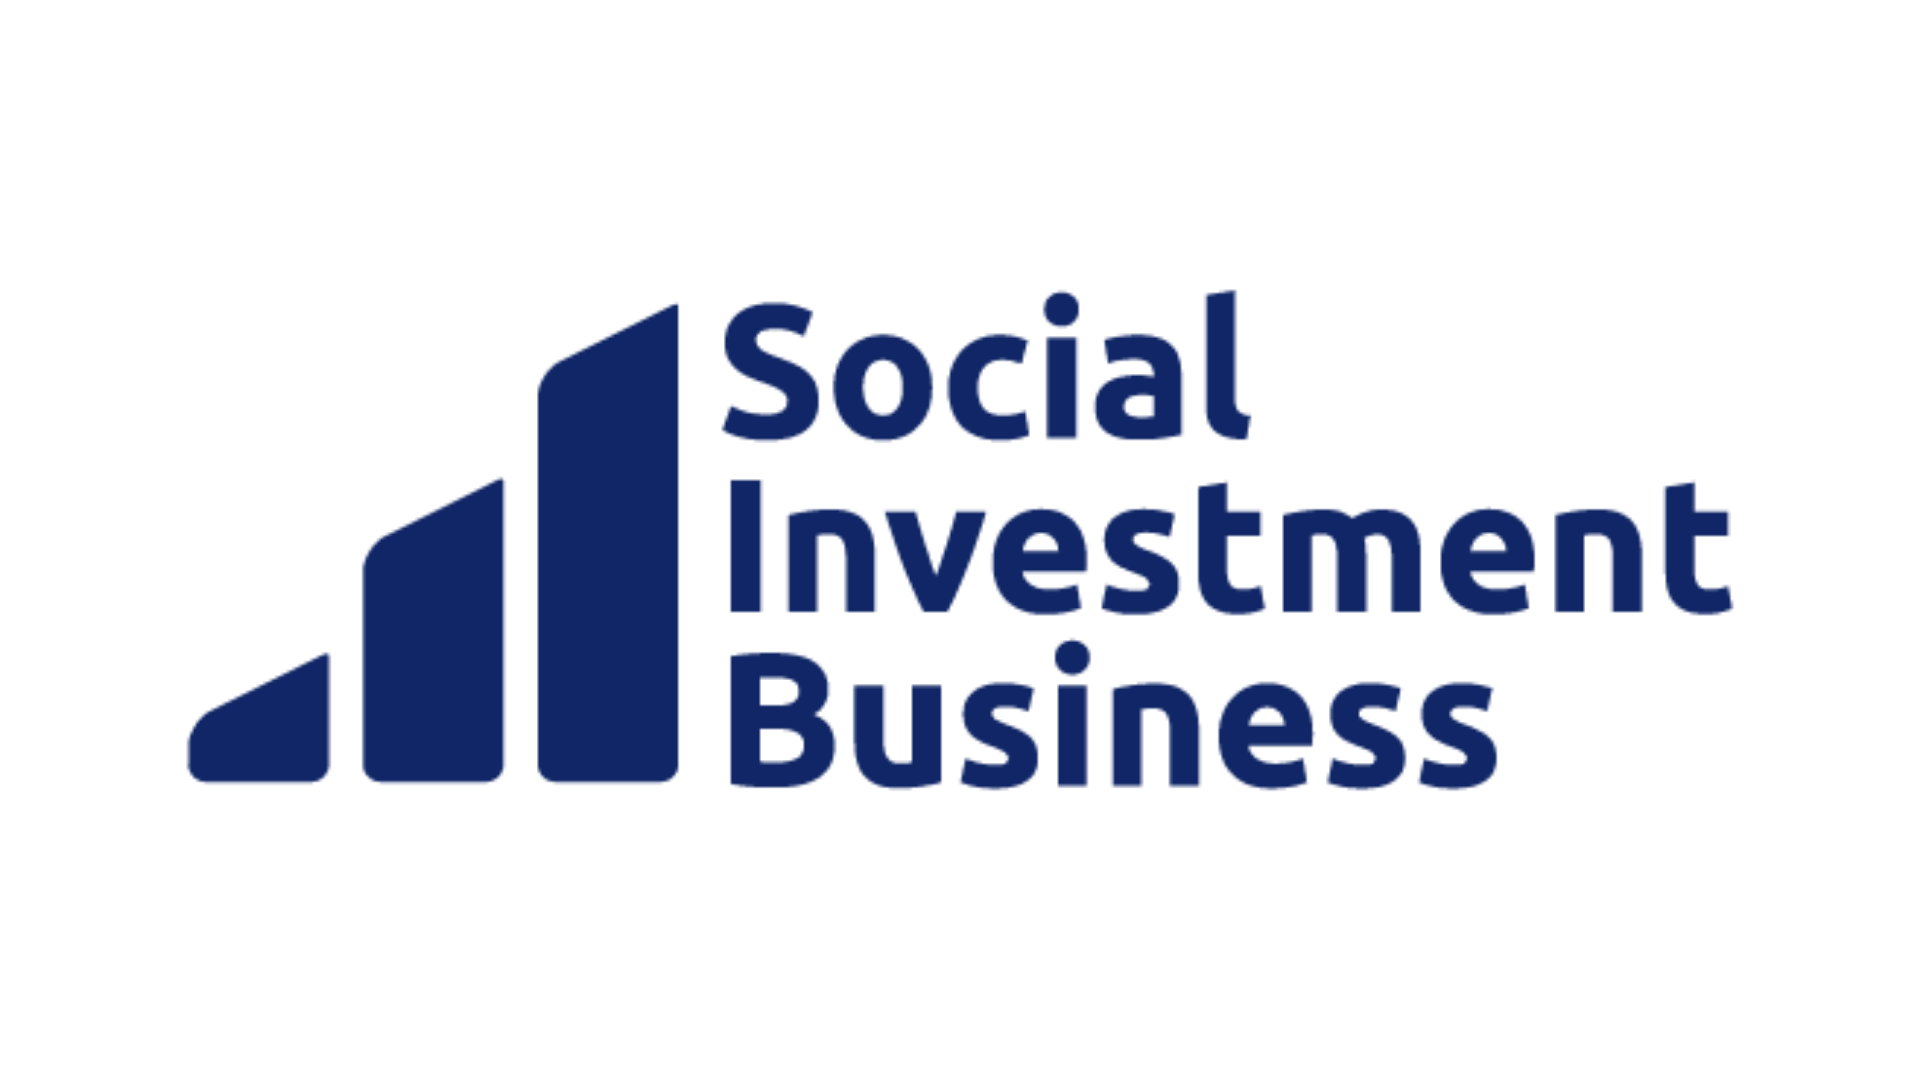 Social Investment Business